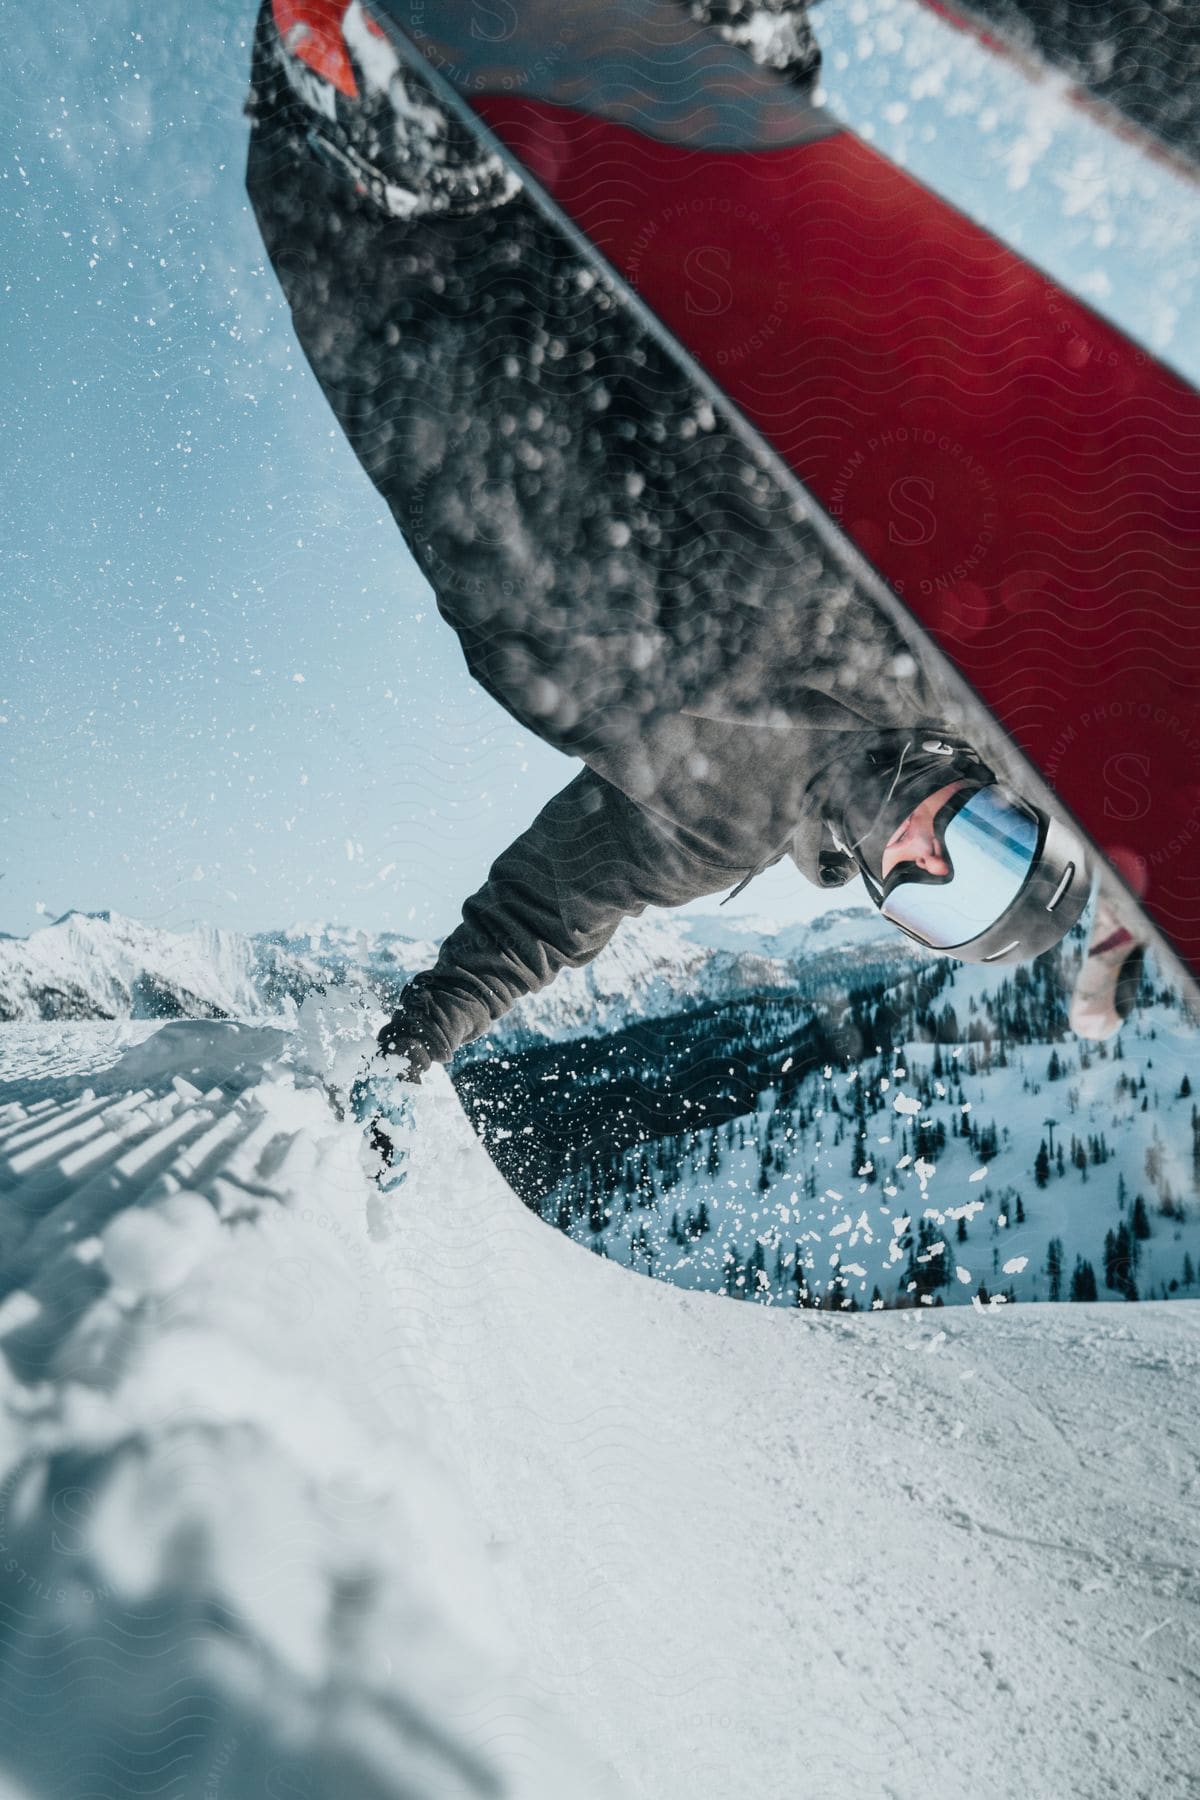 A snowboarder performing an impressive aerial stunt in midair